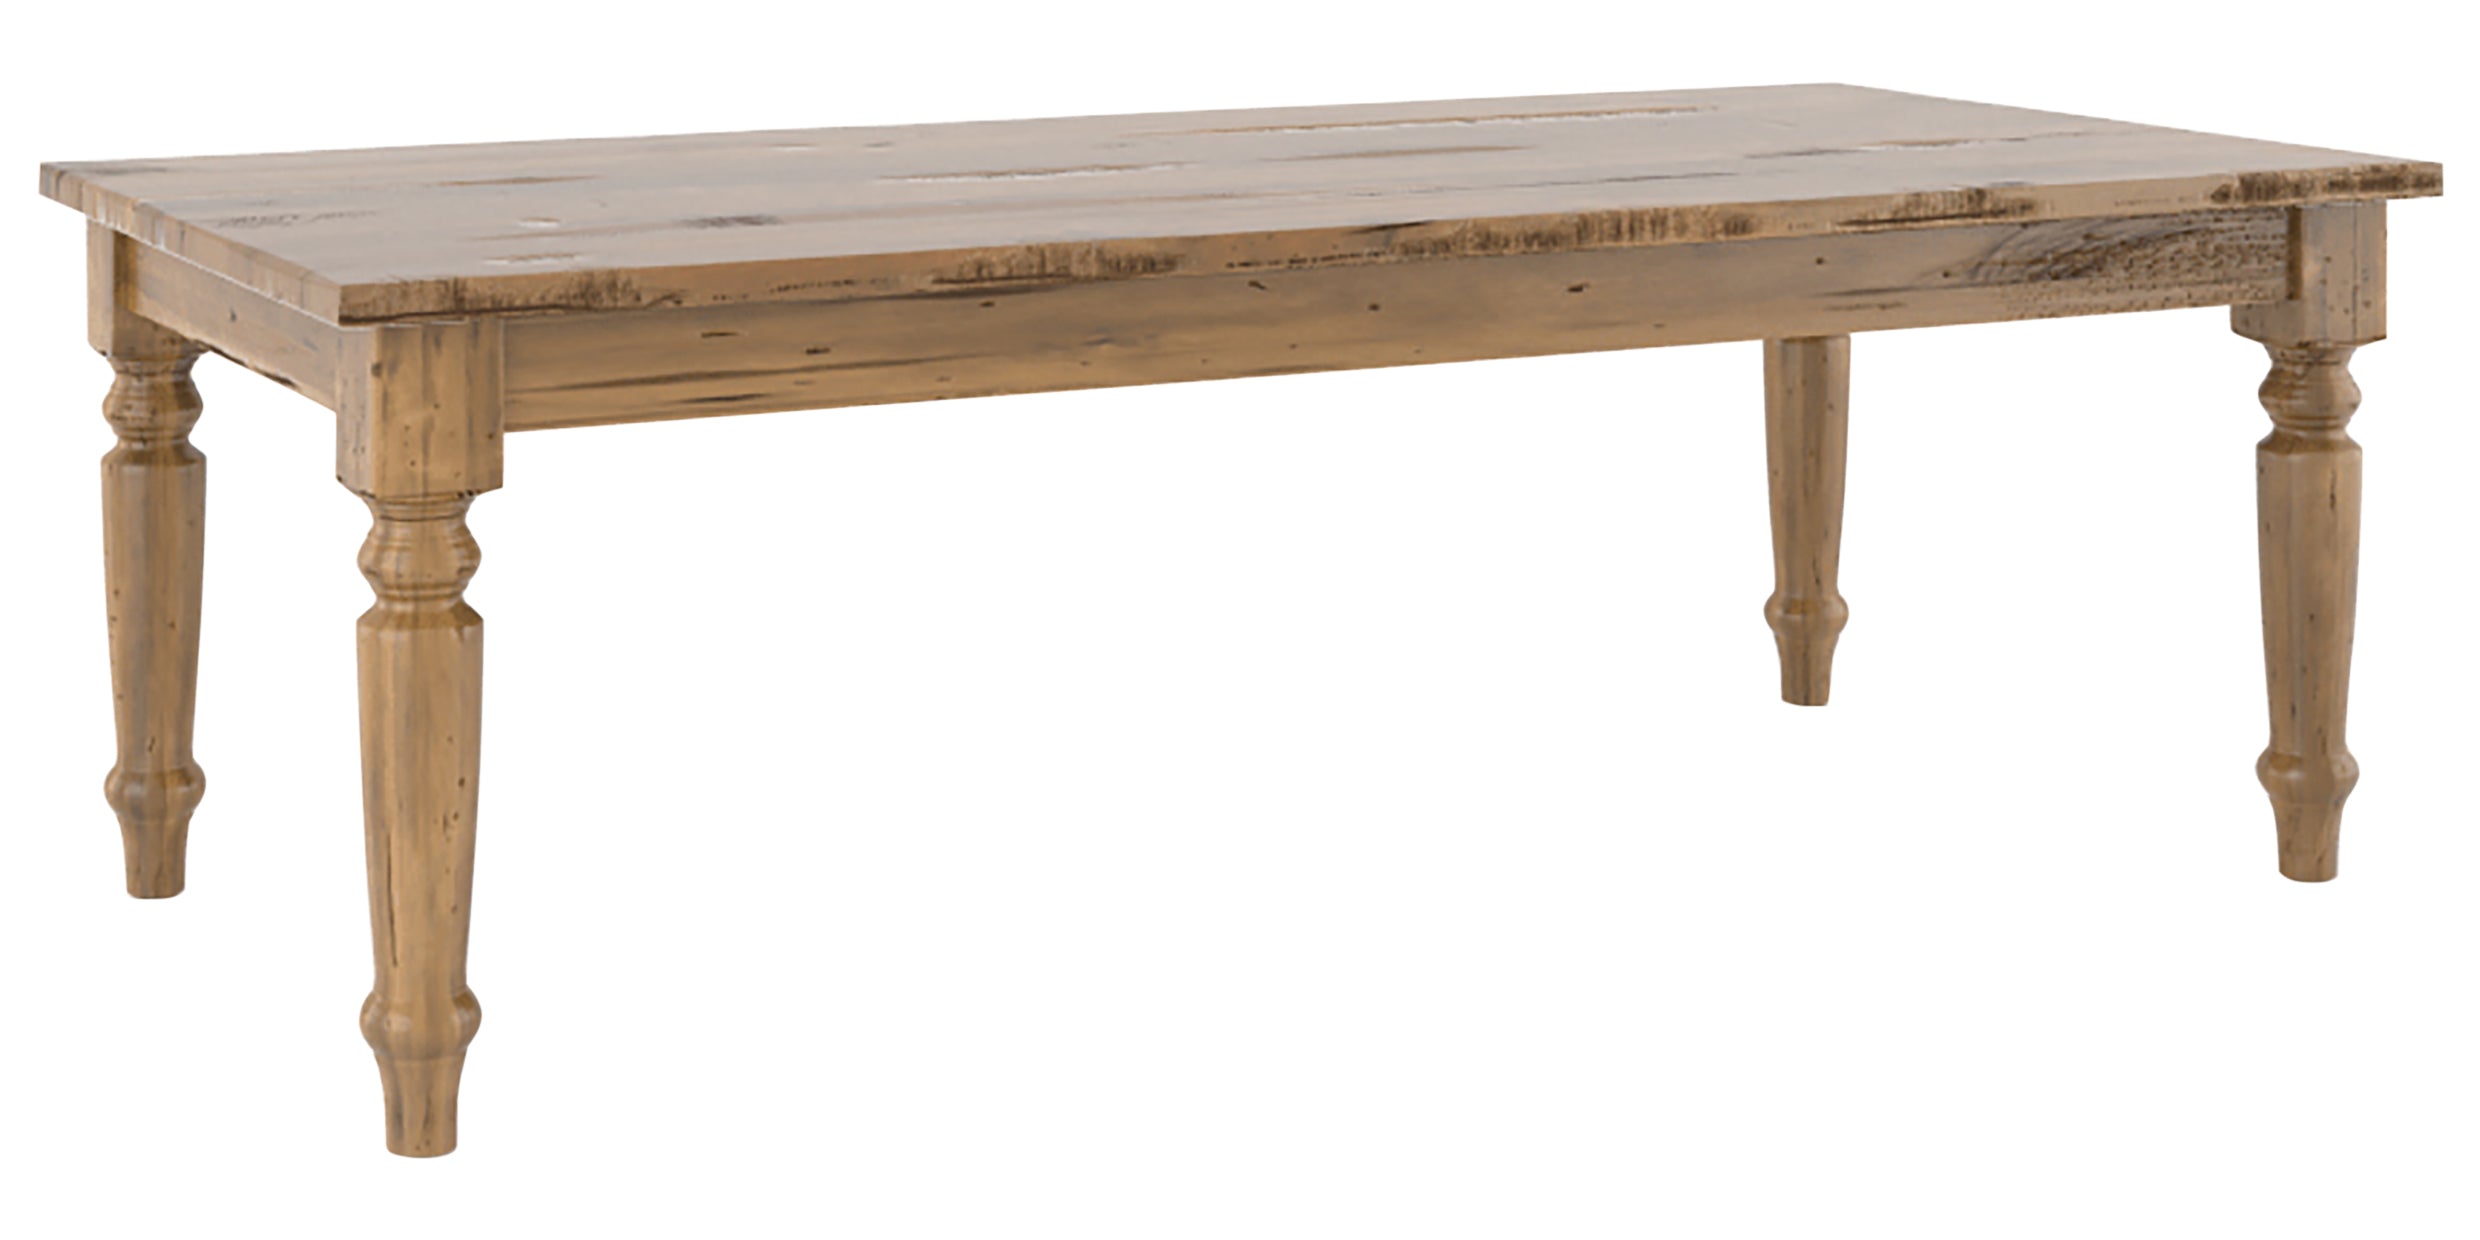 Oak Washed with AA Legs | Canadel Champlain Coffee Table 2754 | Valley Ridge Furniture